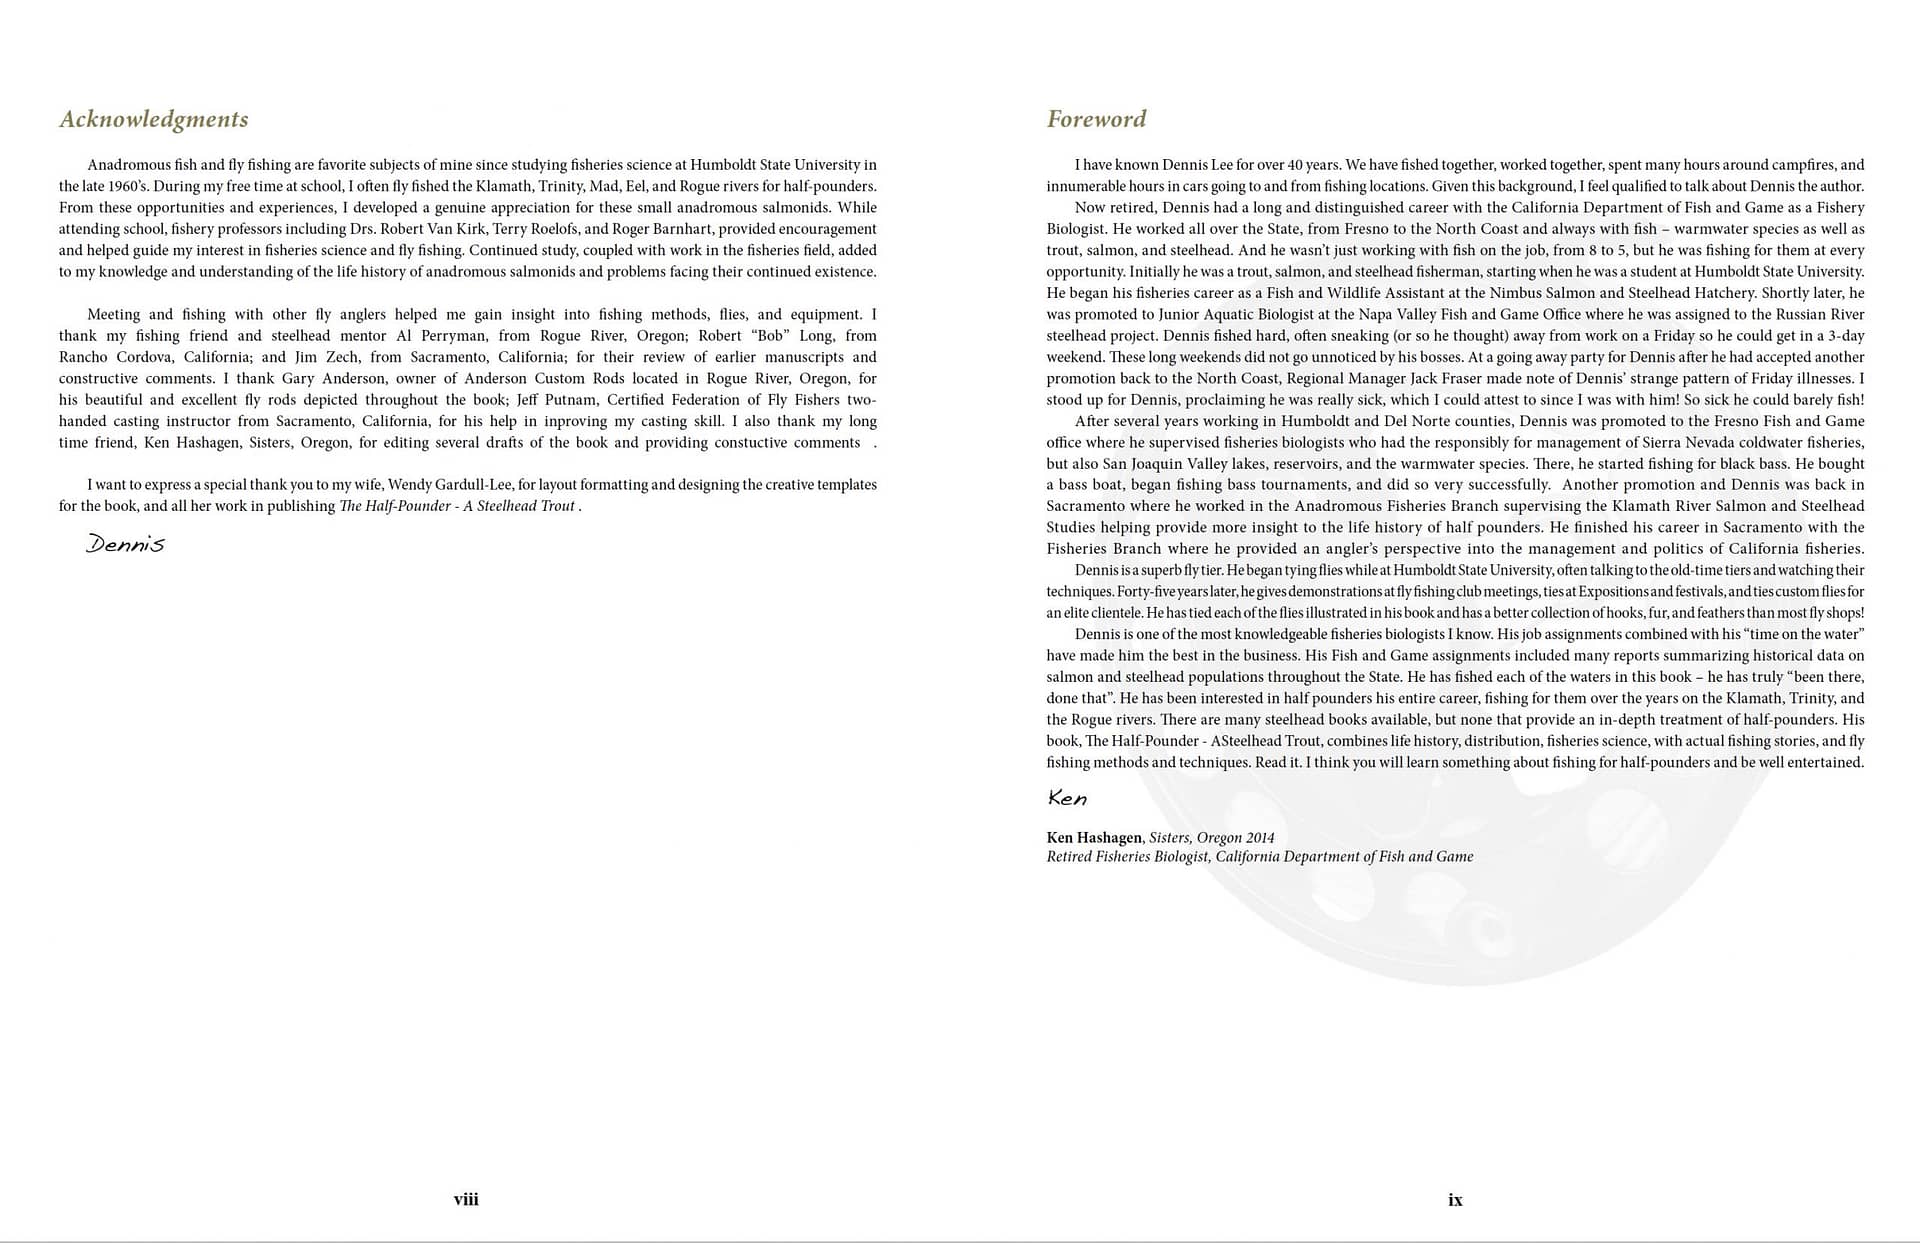 half pounder book Acknowledgments and Foreword spread